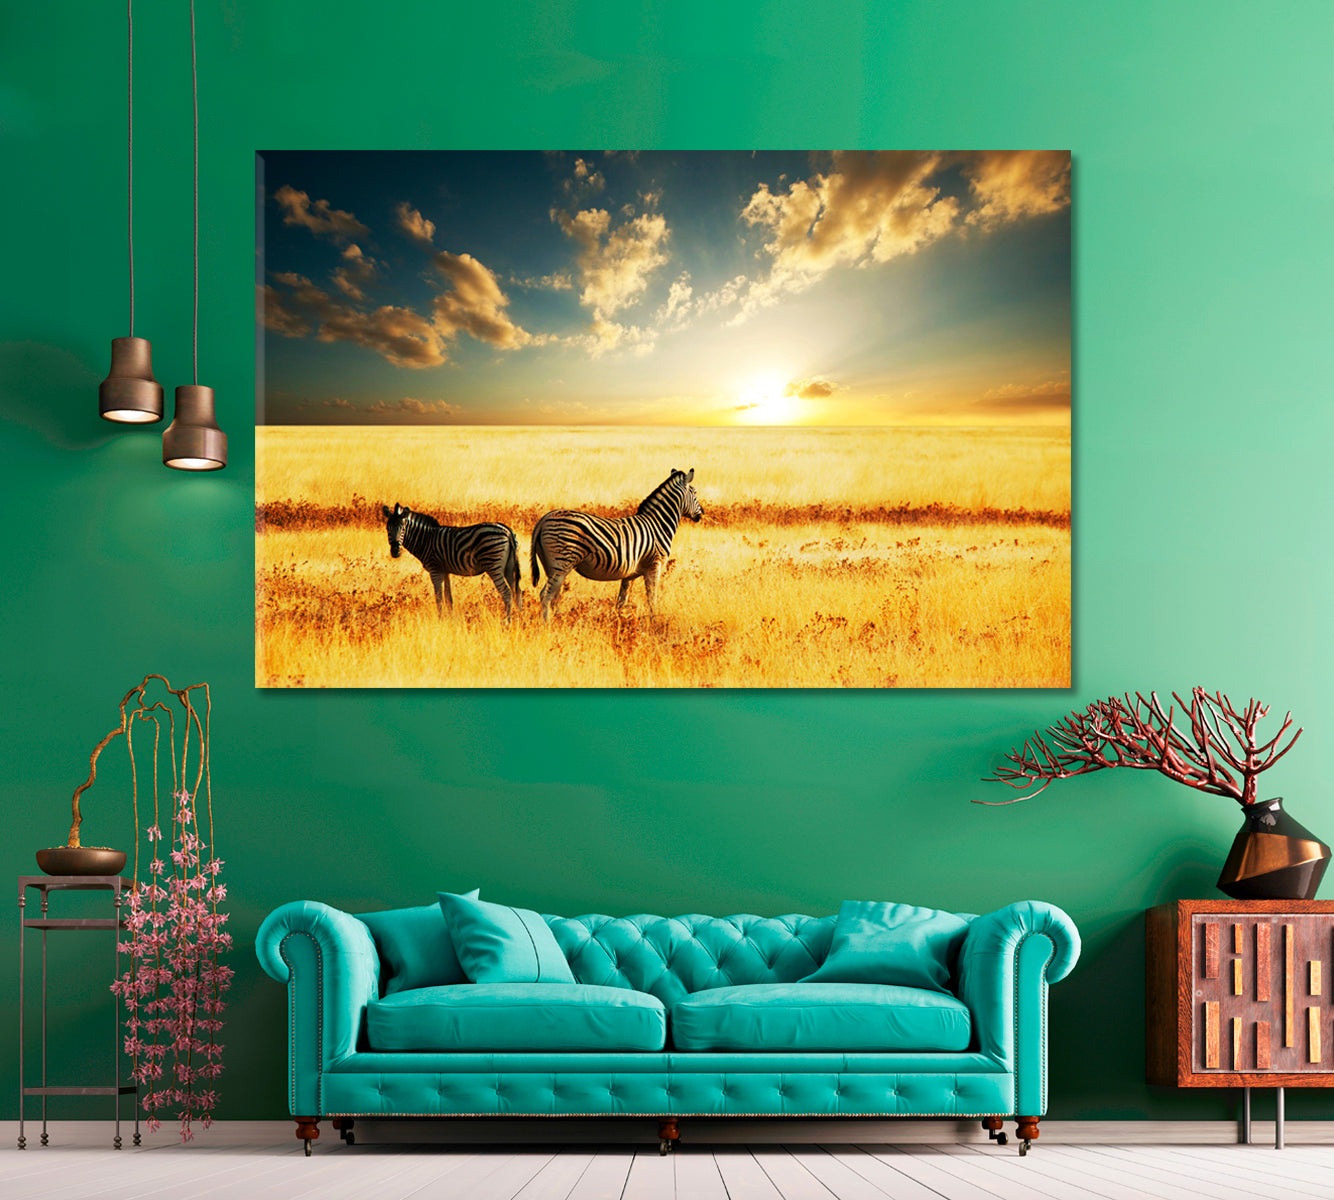 Wild Zebras in African Savannah at Amazing Sunset Canvas Print ArtLexy 1 Panel 24"x16" inches 